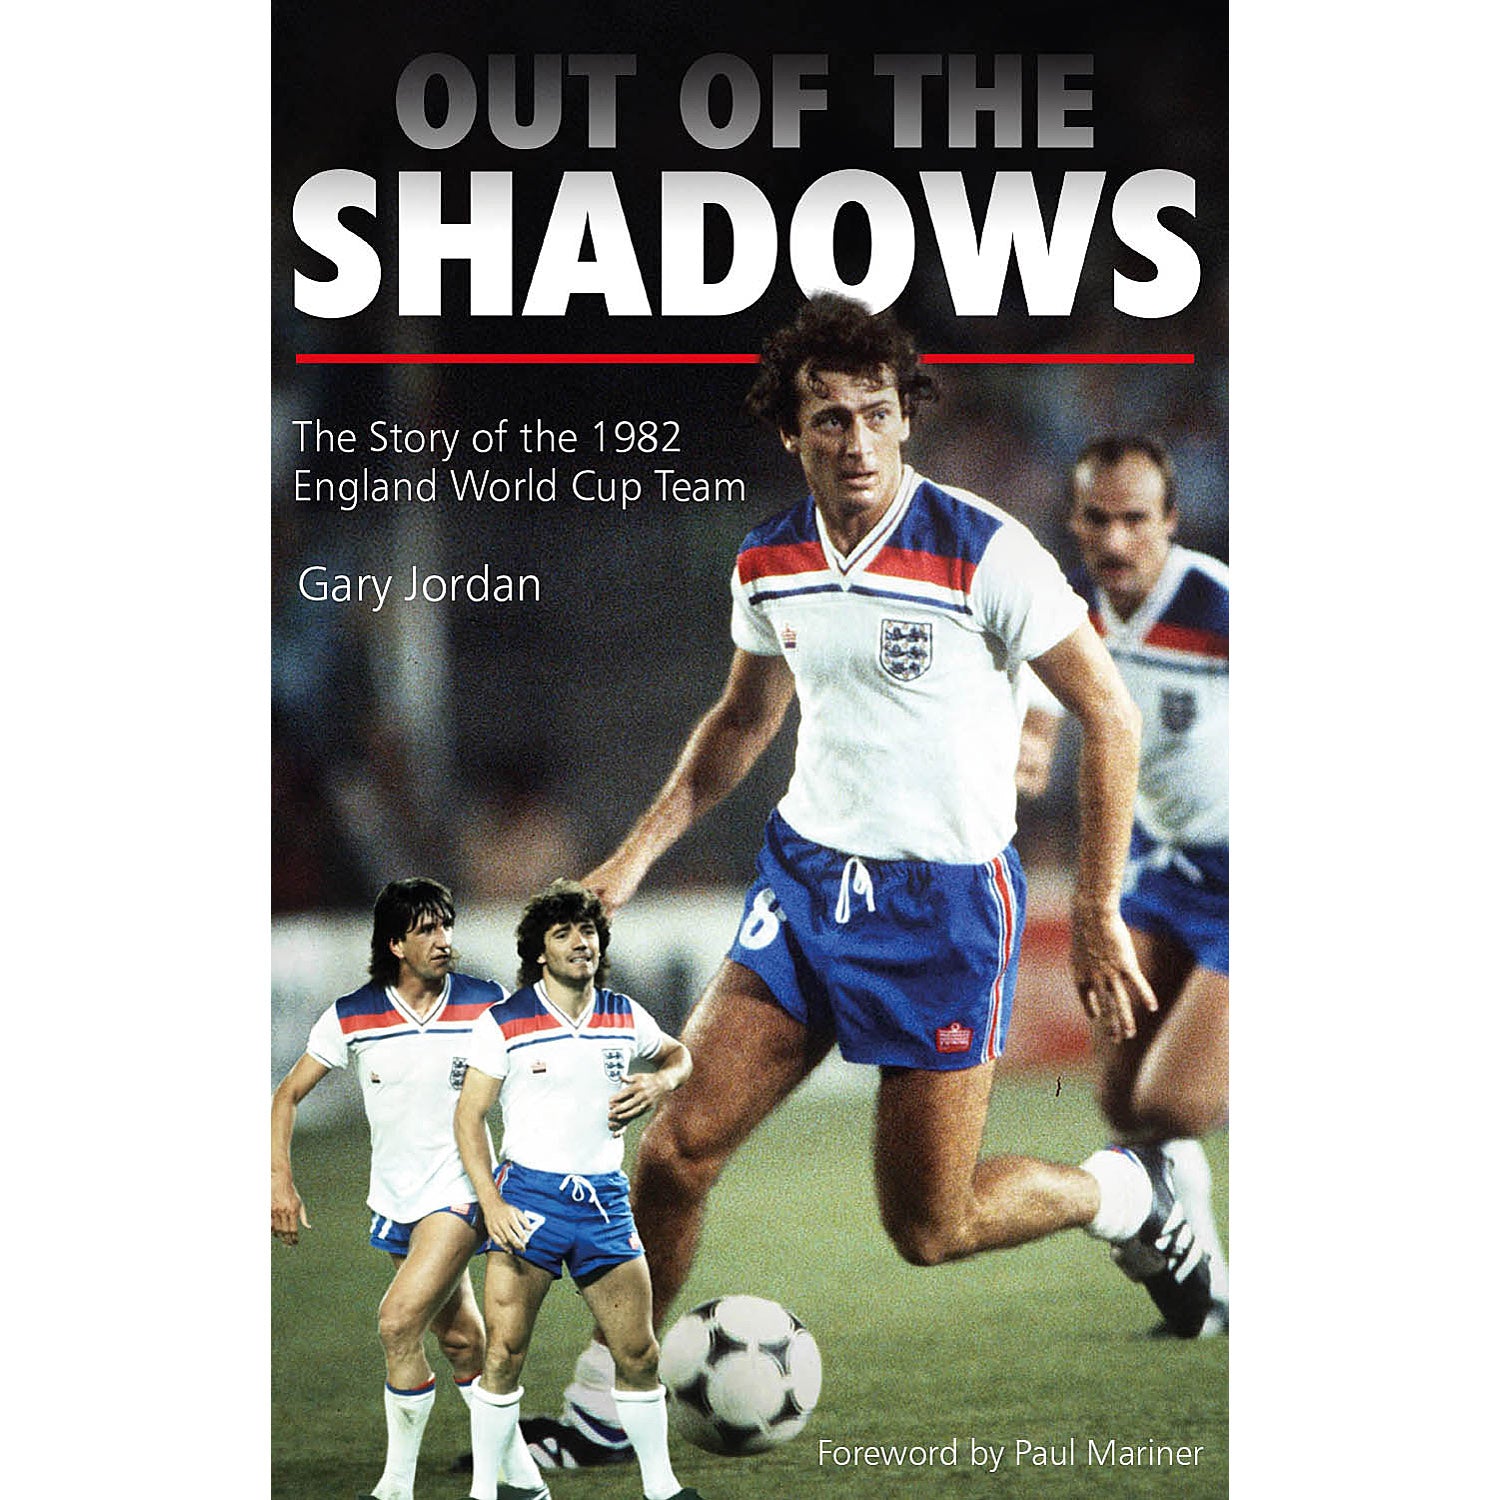 Out of the Shadows – The Story of the 1982 England World Cup Team